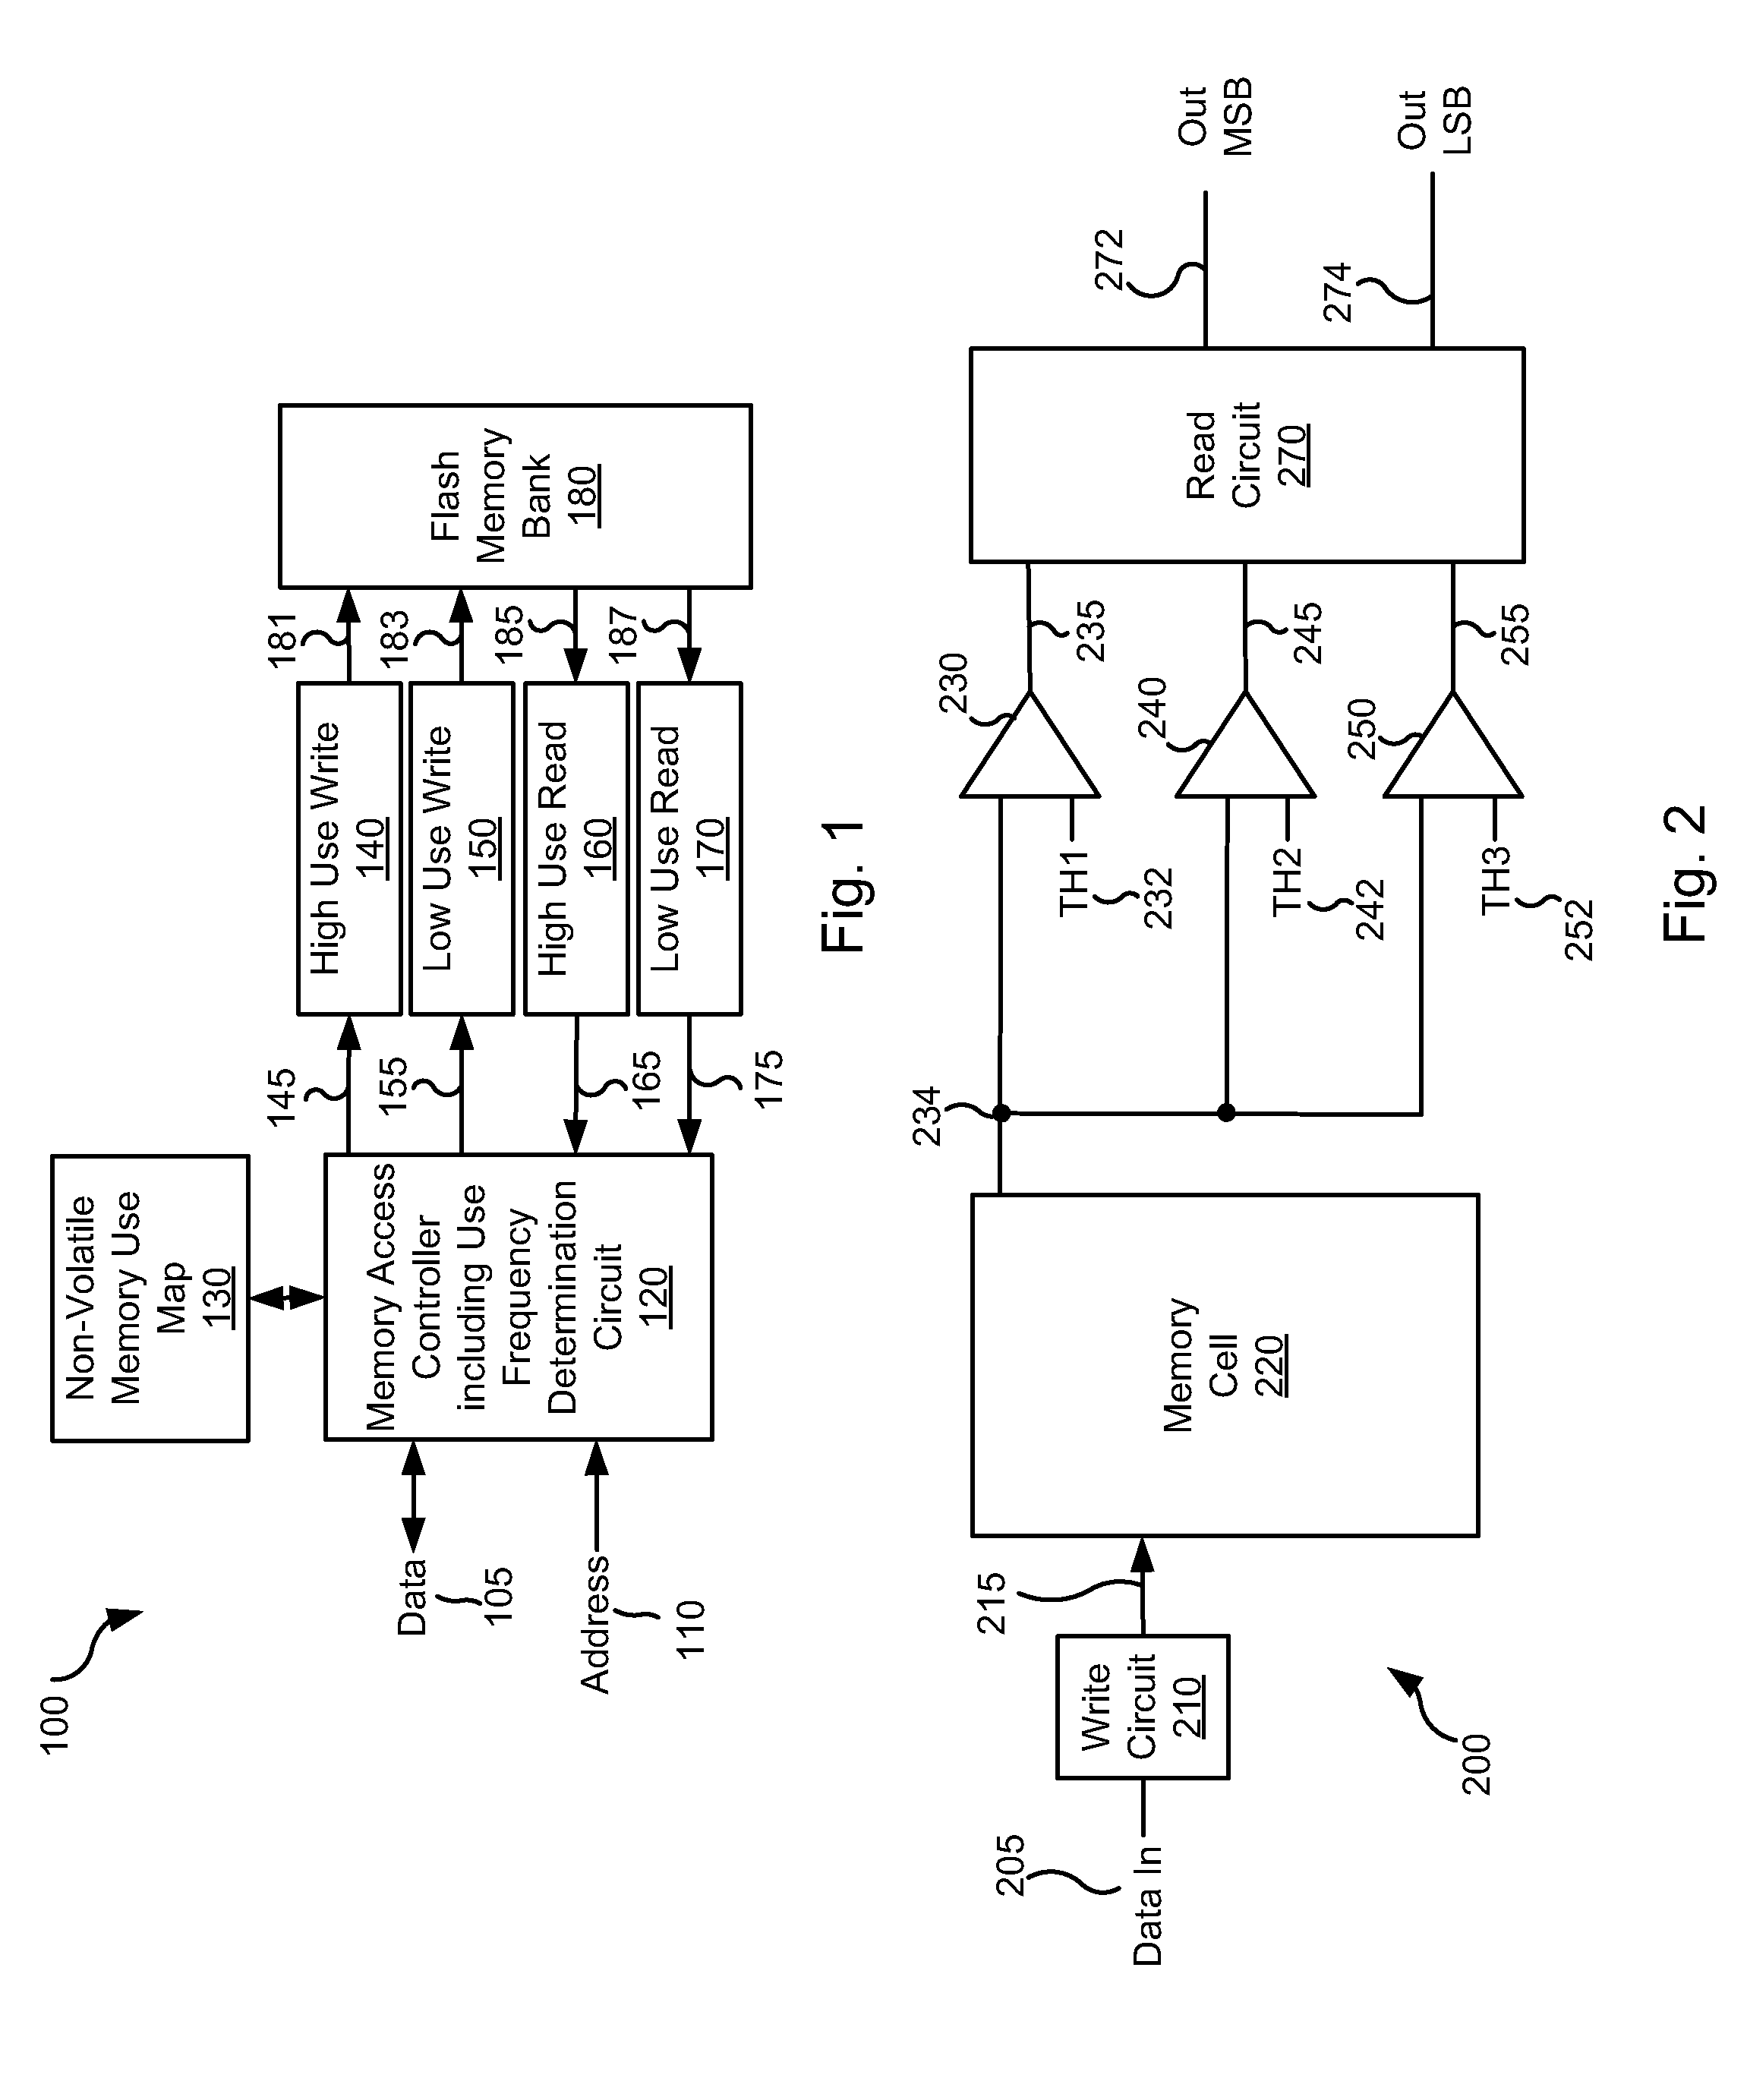 Systems and Methods for Variable Level Use of a Multi-Level Flash Memory